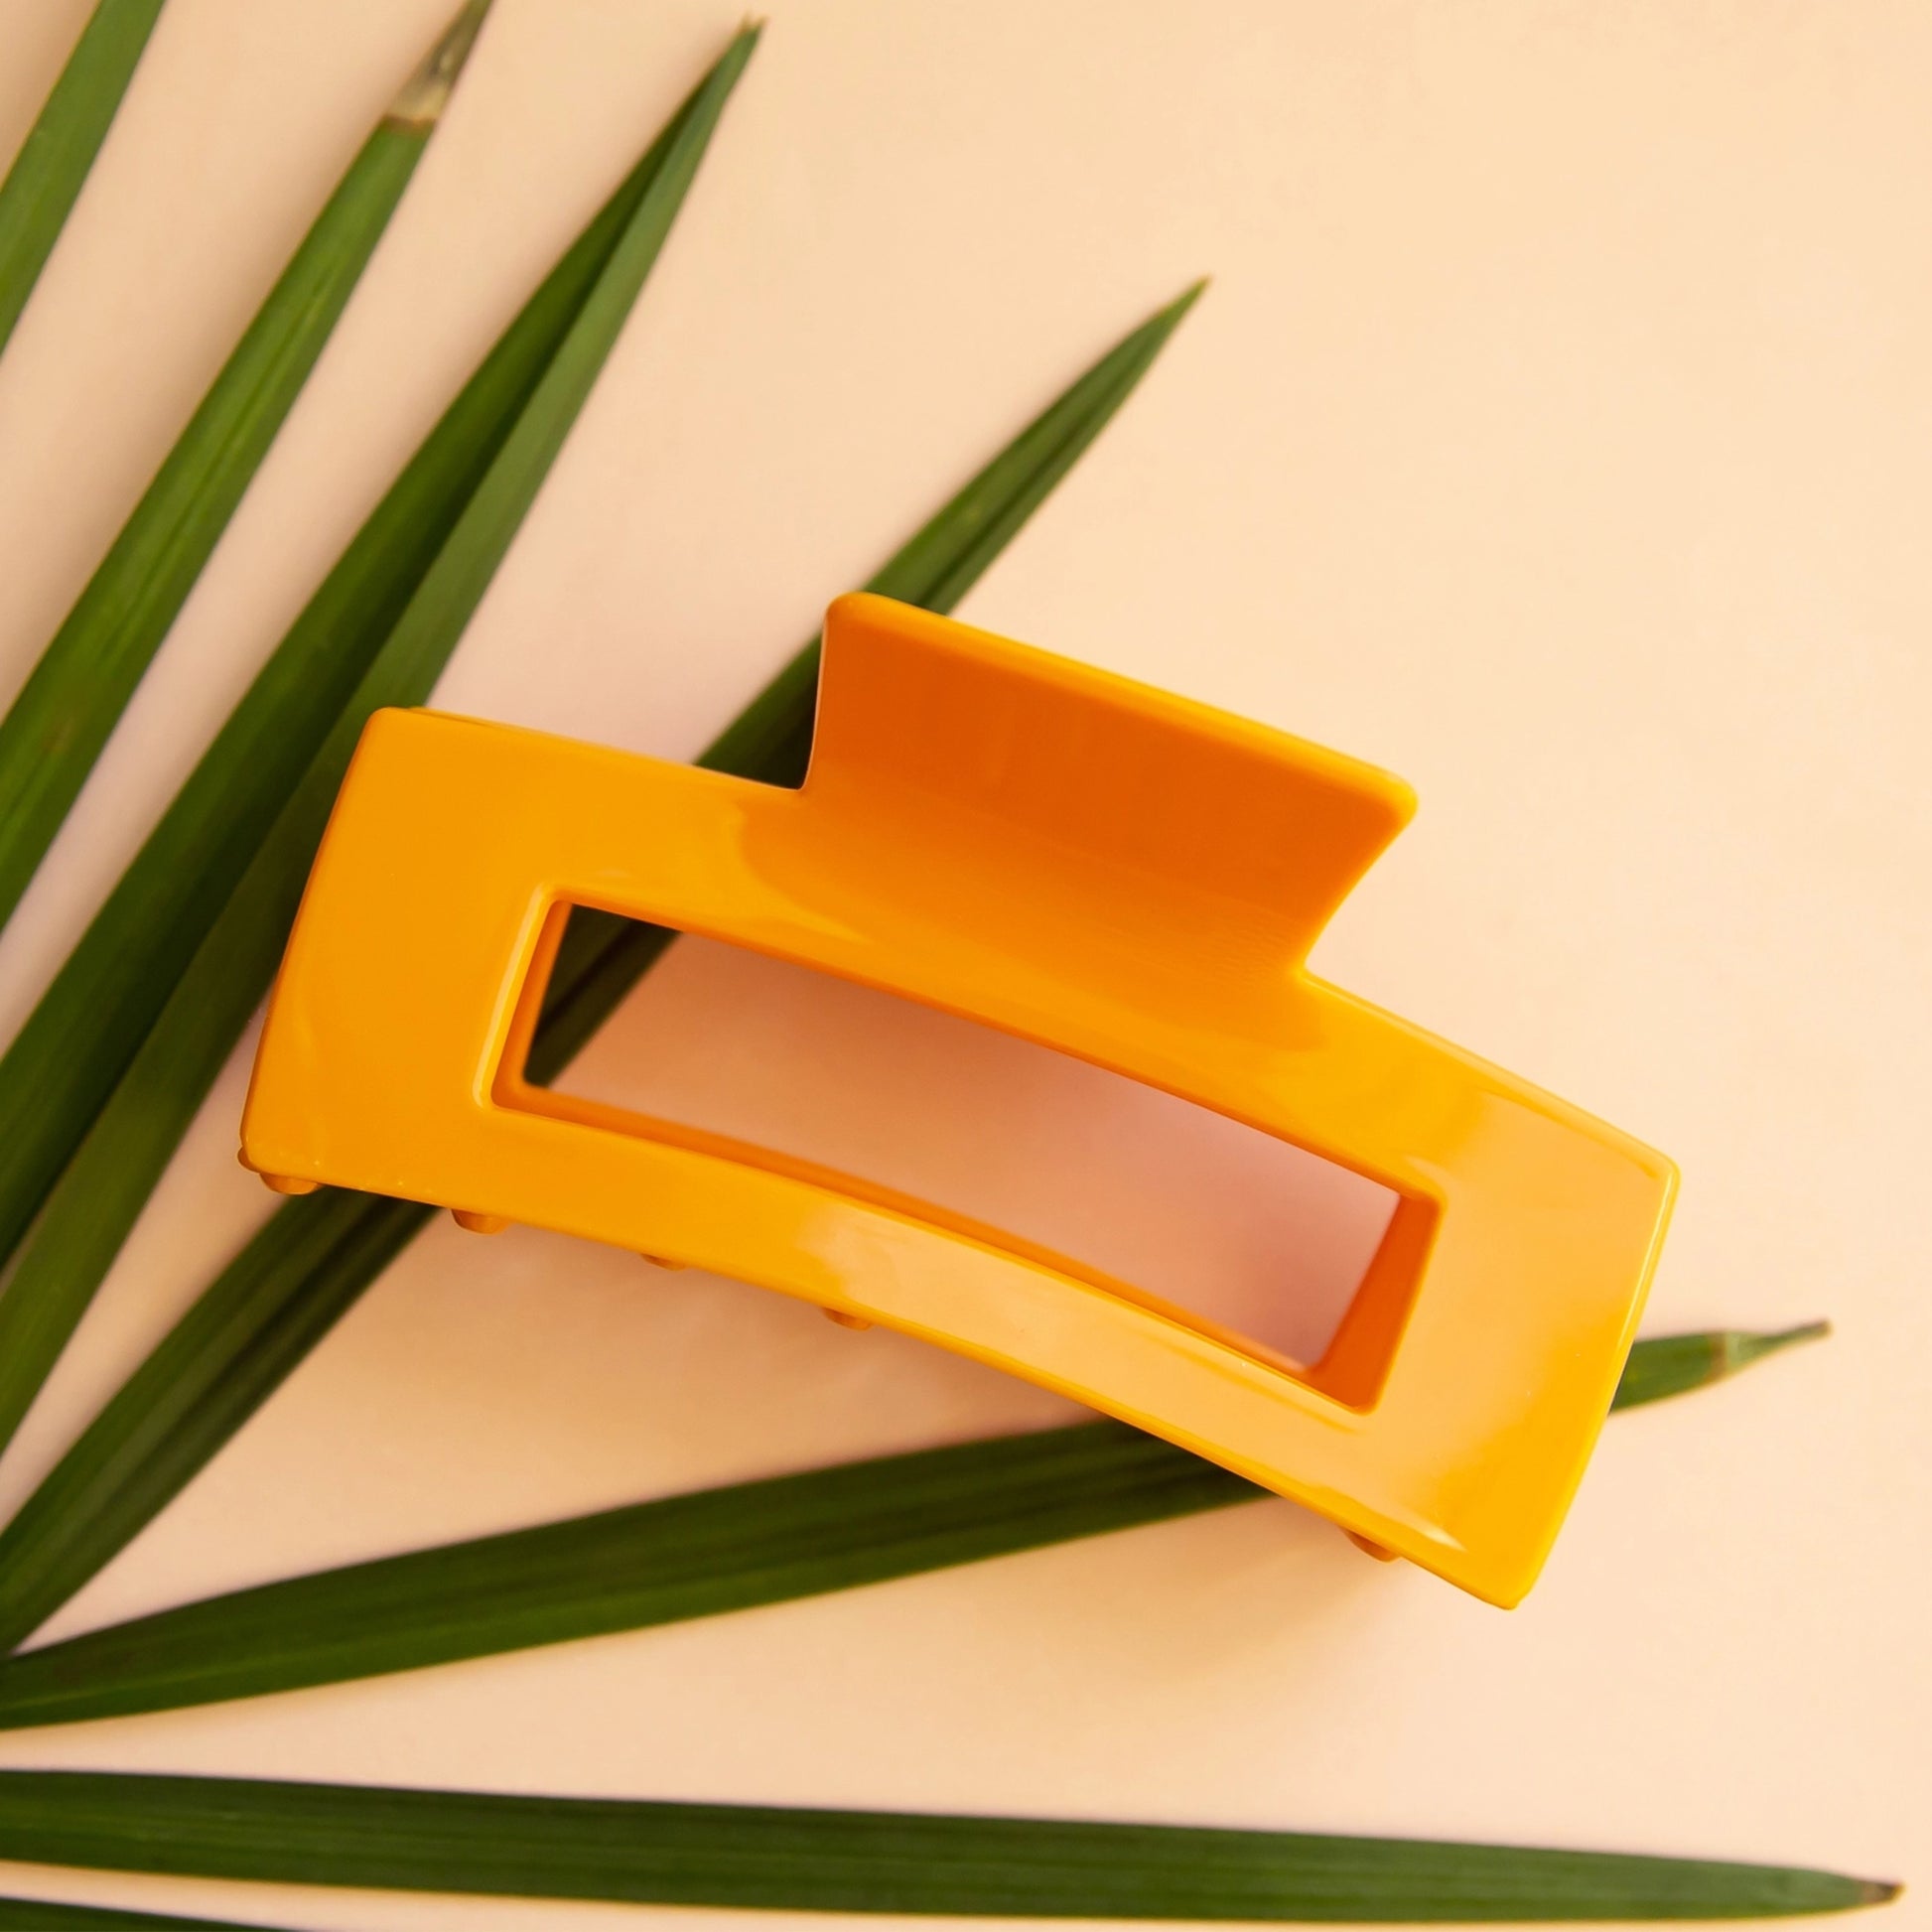 On a peachy background and laying on top of a flat palm leaf is the rectangular claw clip in the shade mango which is a vibrant yellow/orange color.